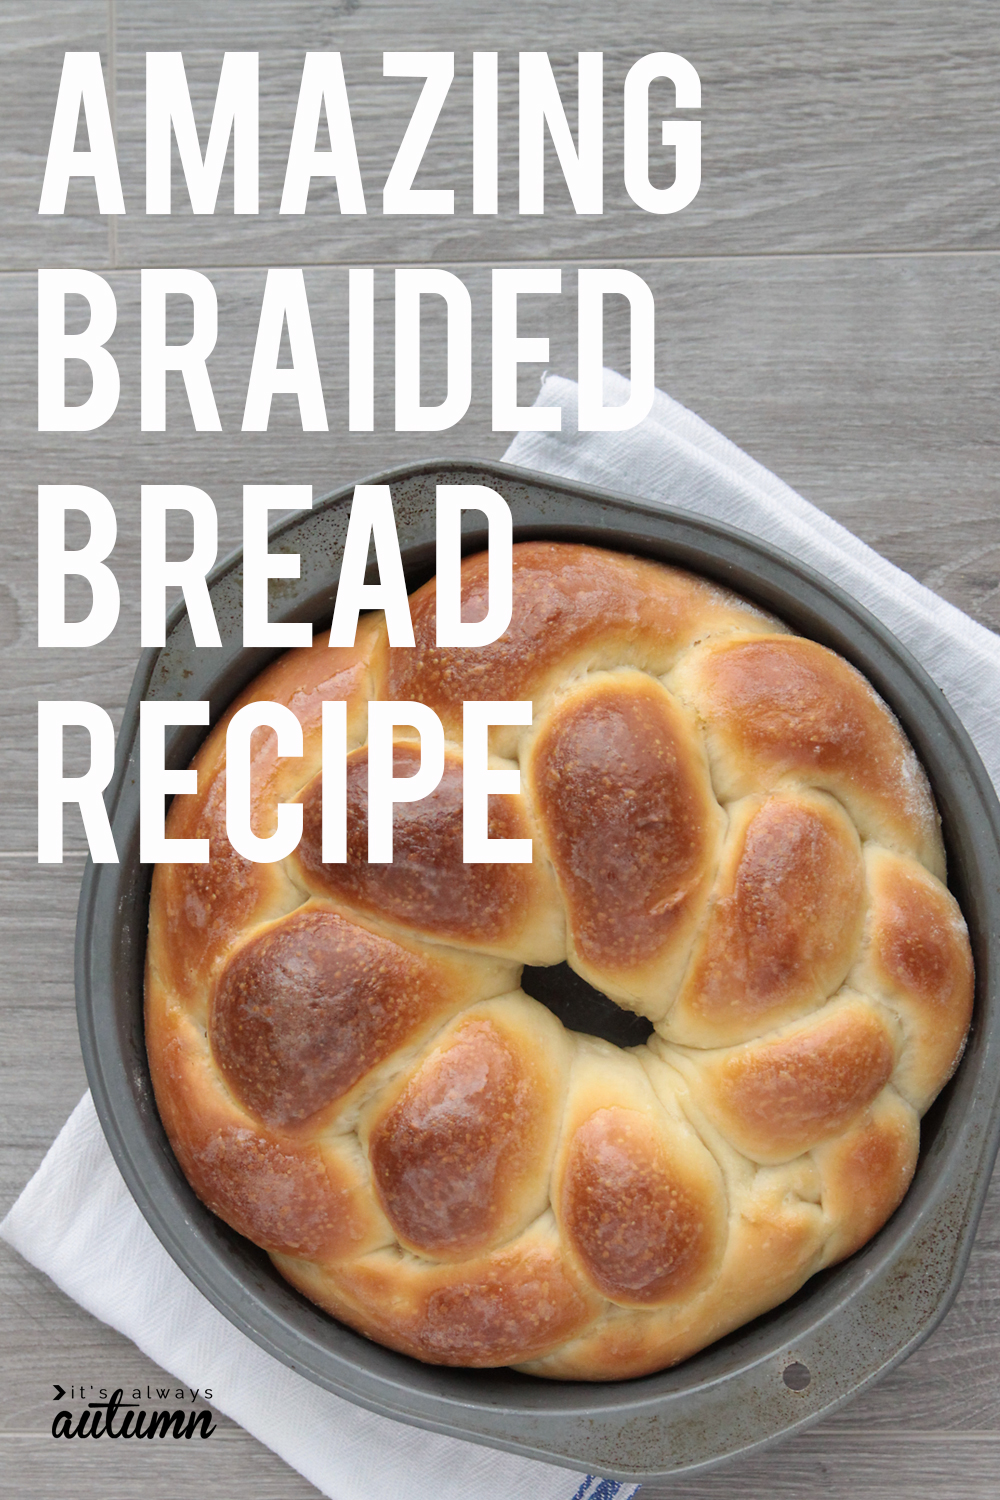 Loaf of braided bread in a round pan